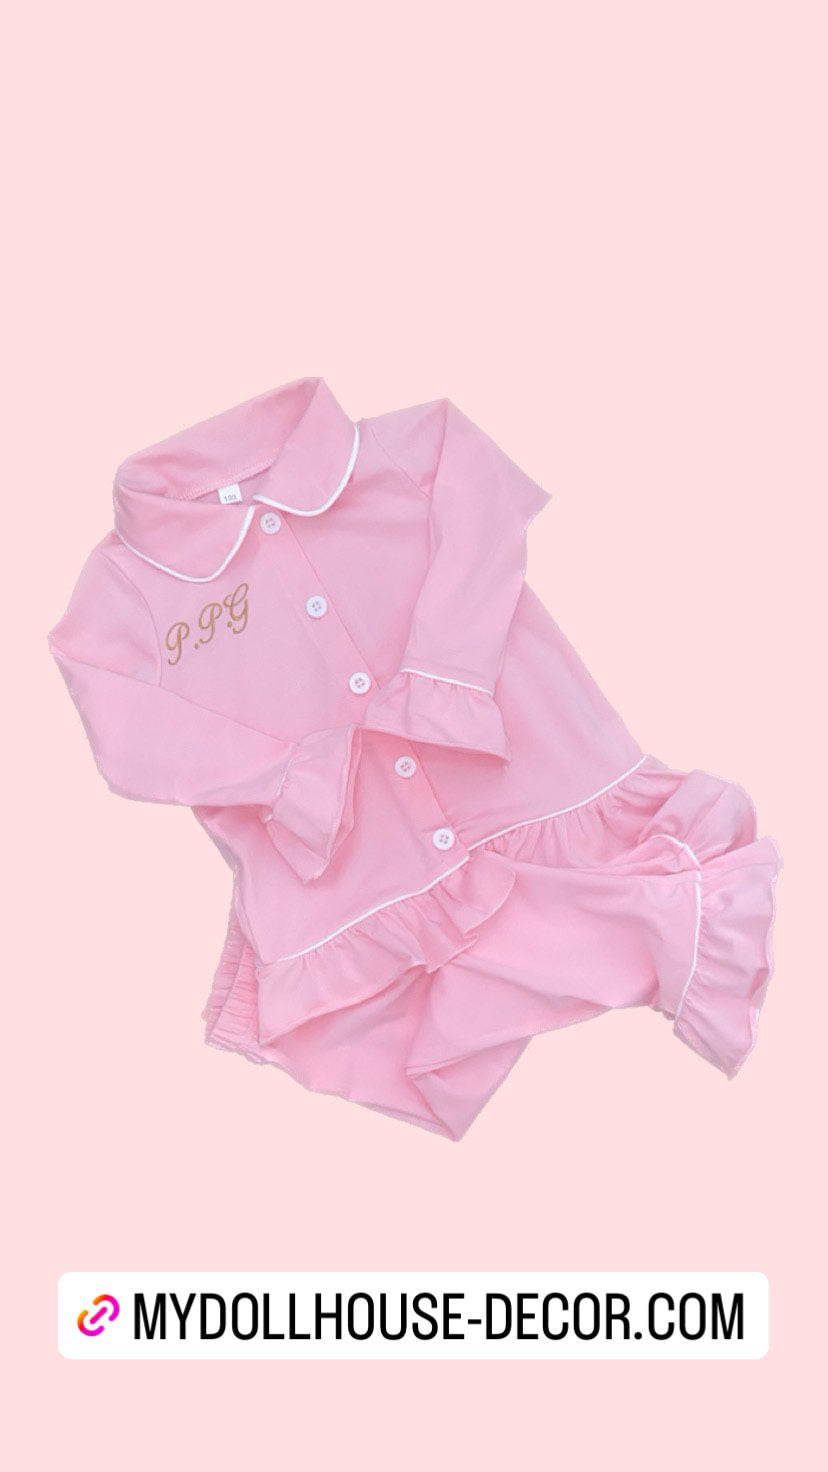 PINK FRILLY BUTTON UP PERSONALISED PYJAMAS 2-4 WEEKS